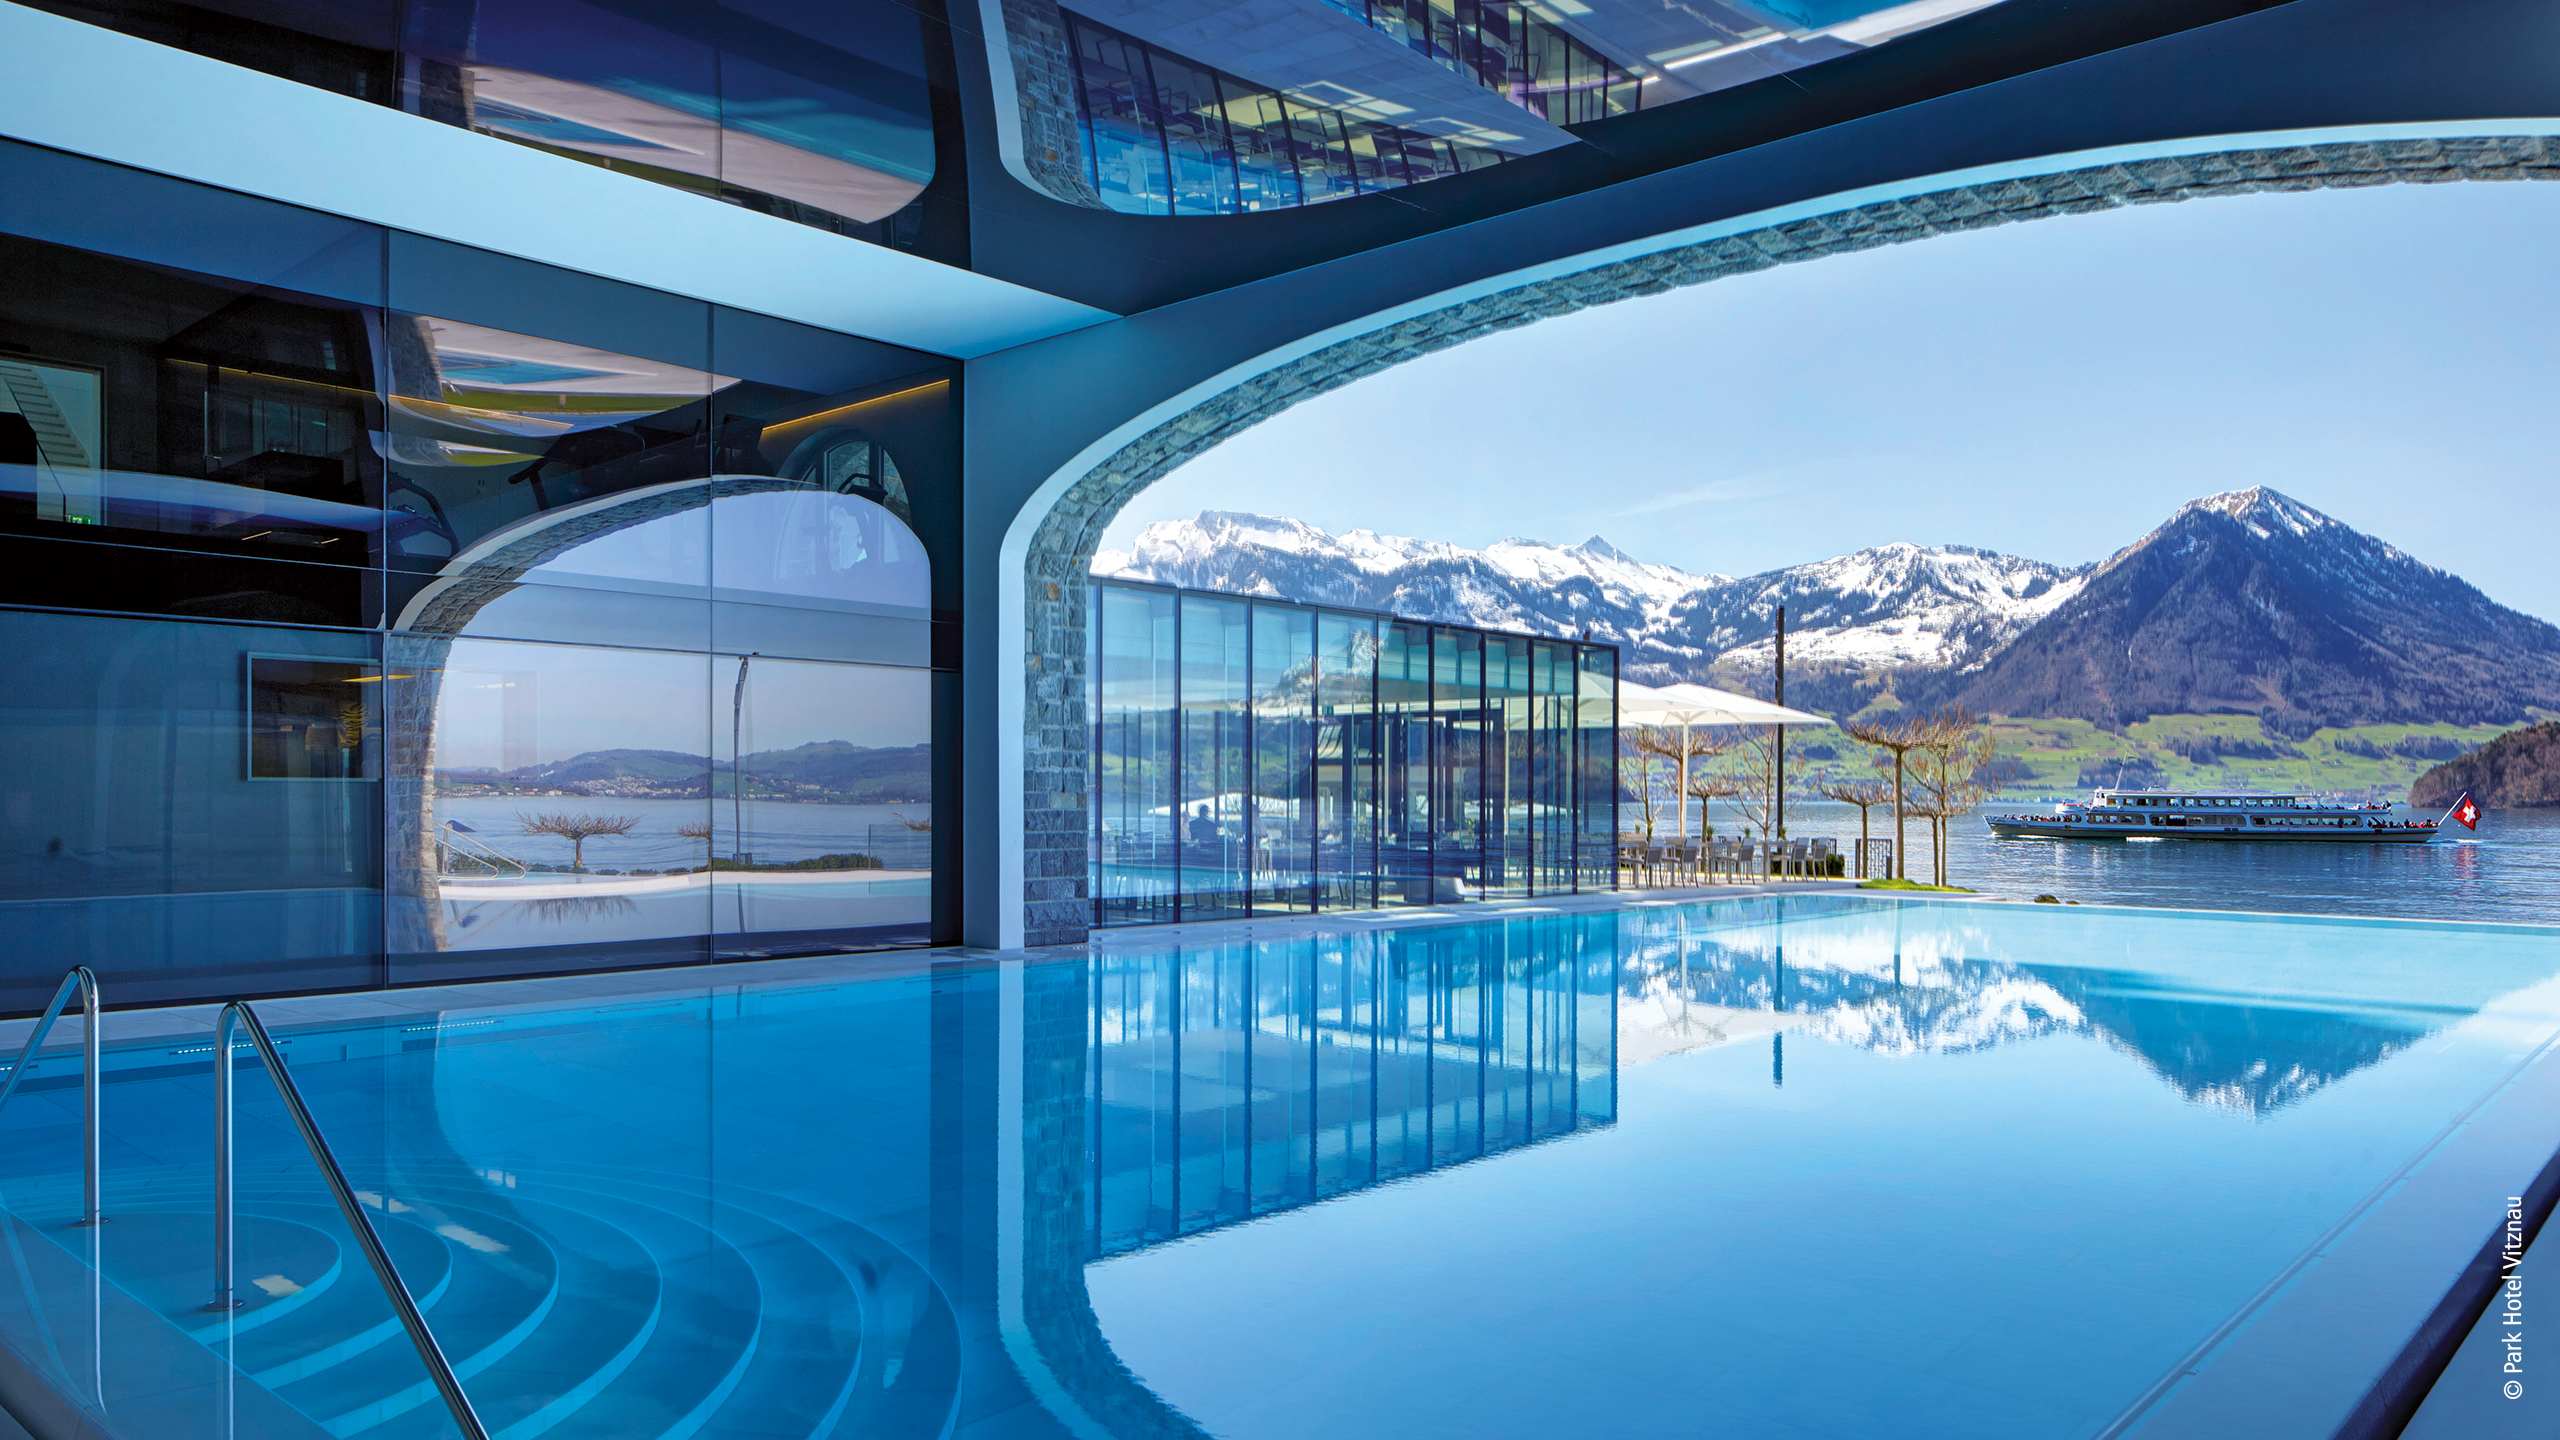 Housed directly on the shores of Lake Lucerne in Switzerland, the Park Hotel Vitznau combines historic ambience with the facilities and services of a modern 5-star luxury hotel. 